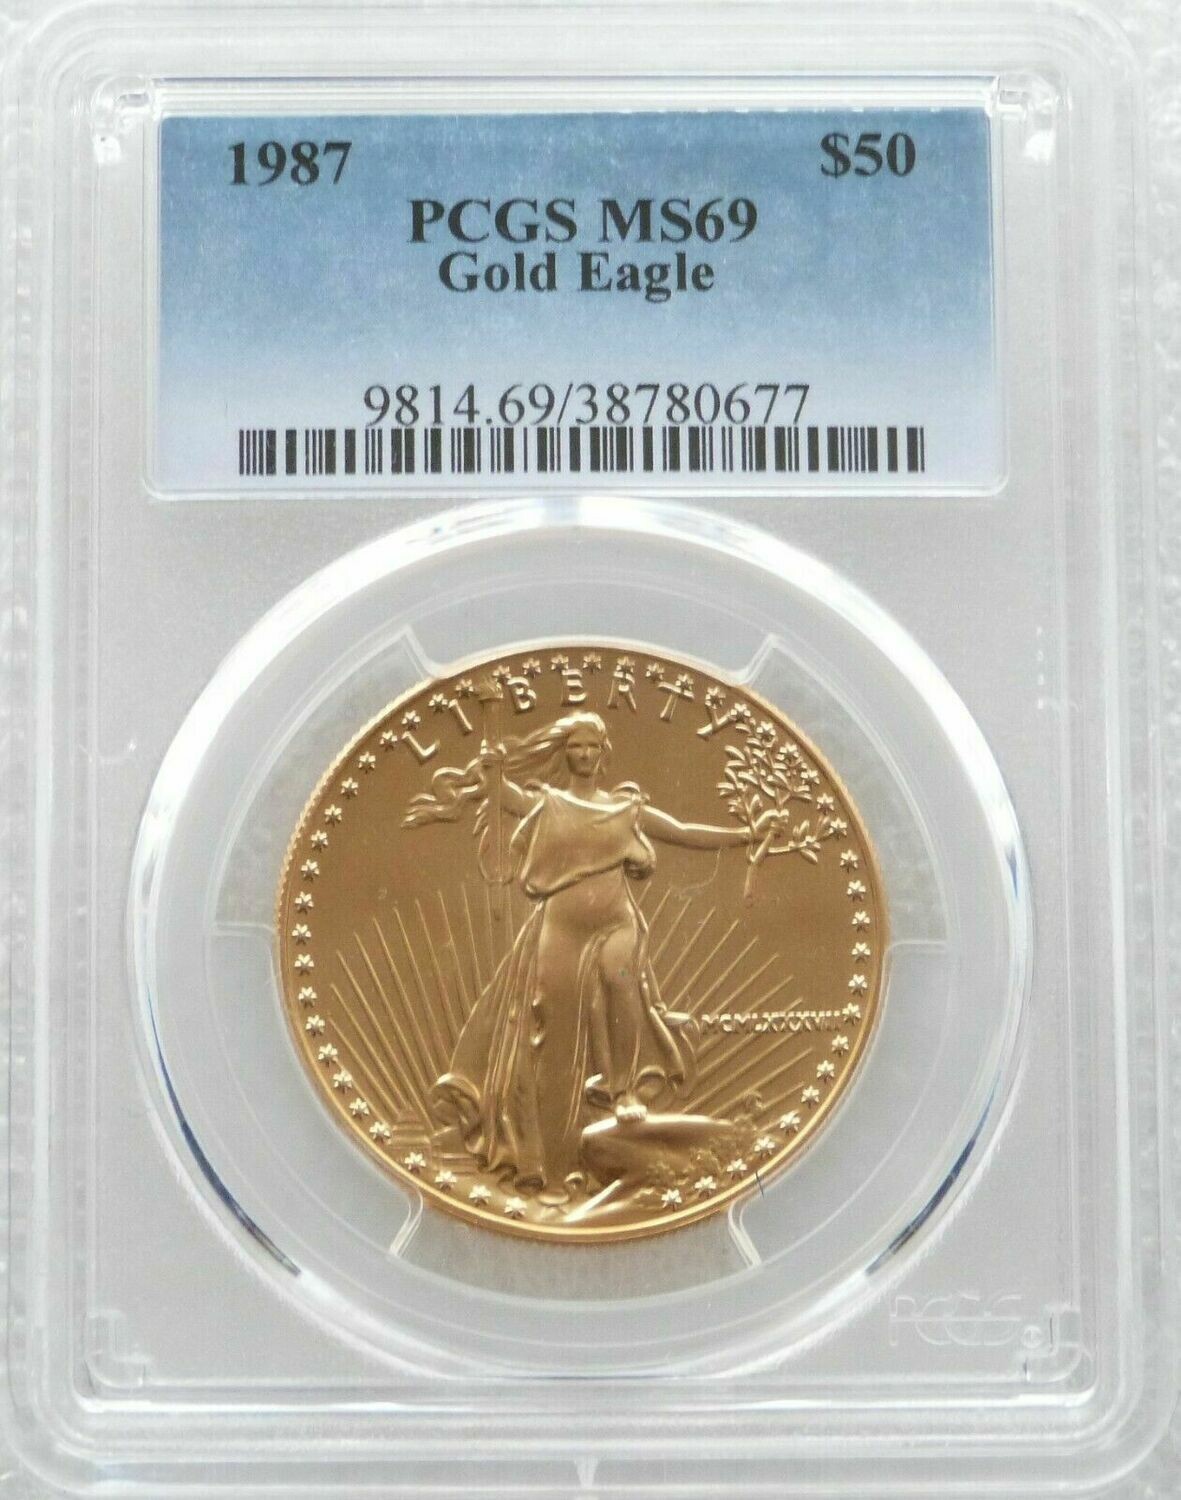 1987 American Eagle $50 Gold 1oz Coin PCGS MS69